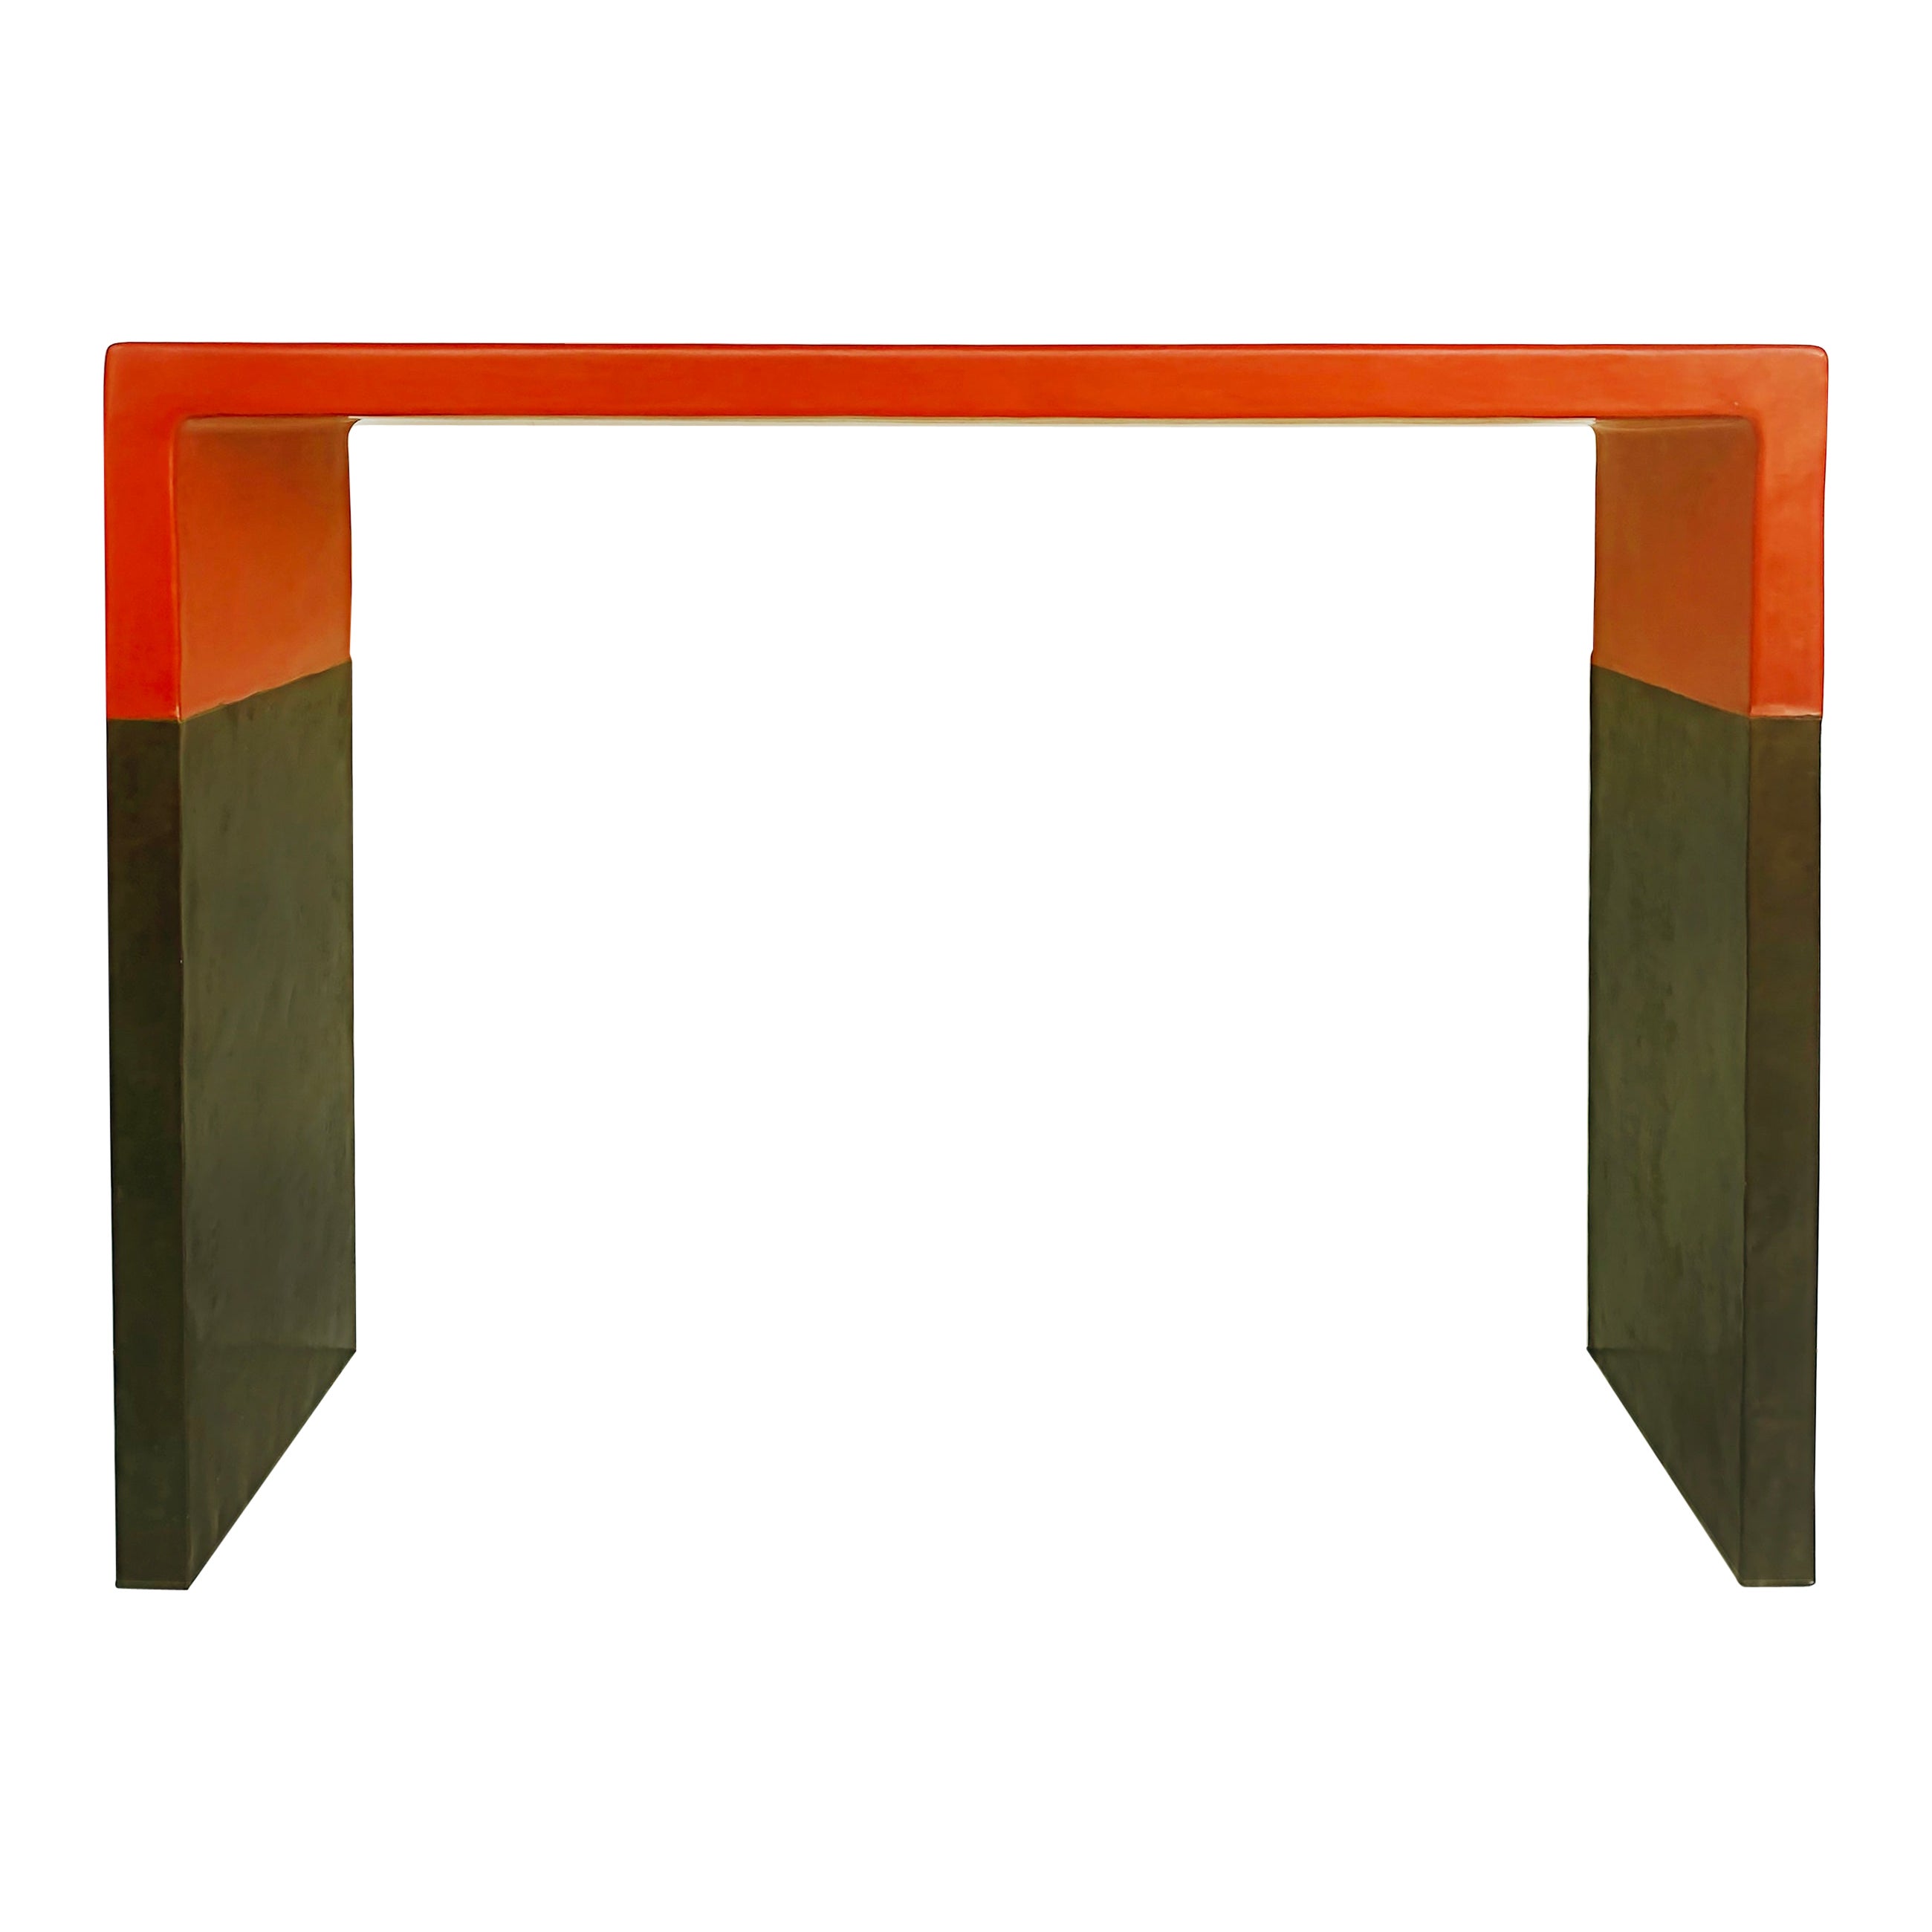 Robert Kuo Baker Furniture Lacquer, Copper Console Table, One-Off, circa 2000